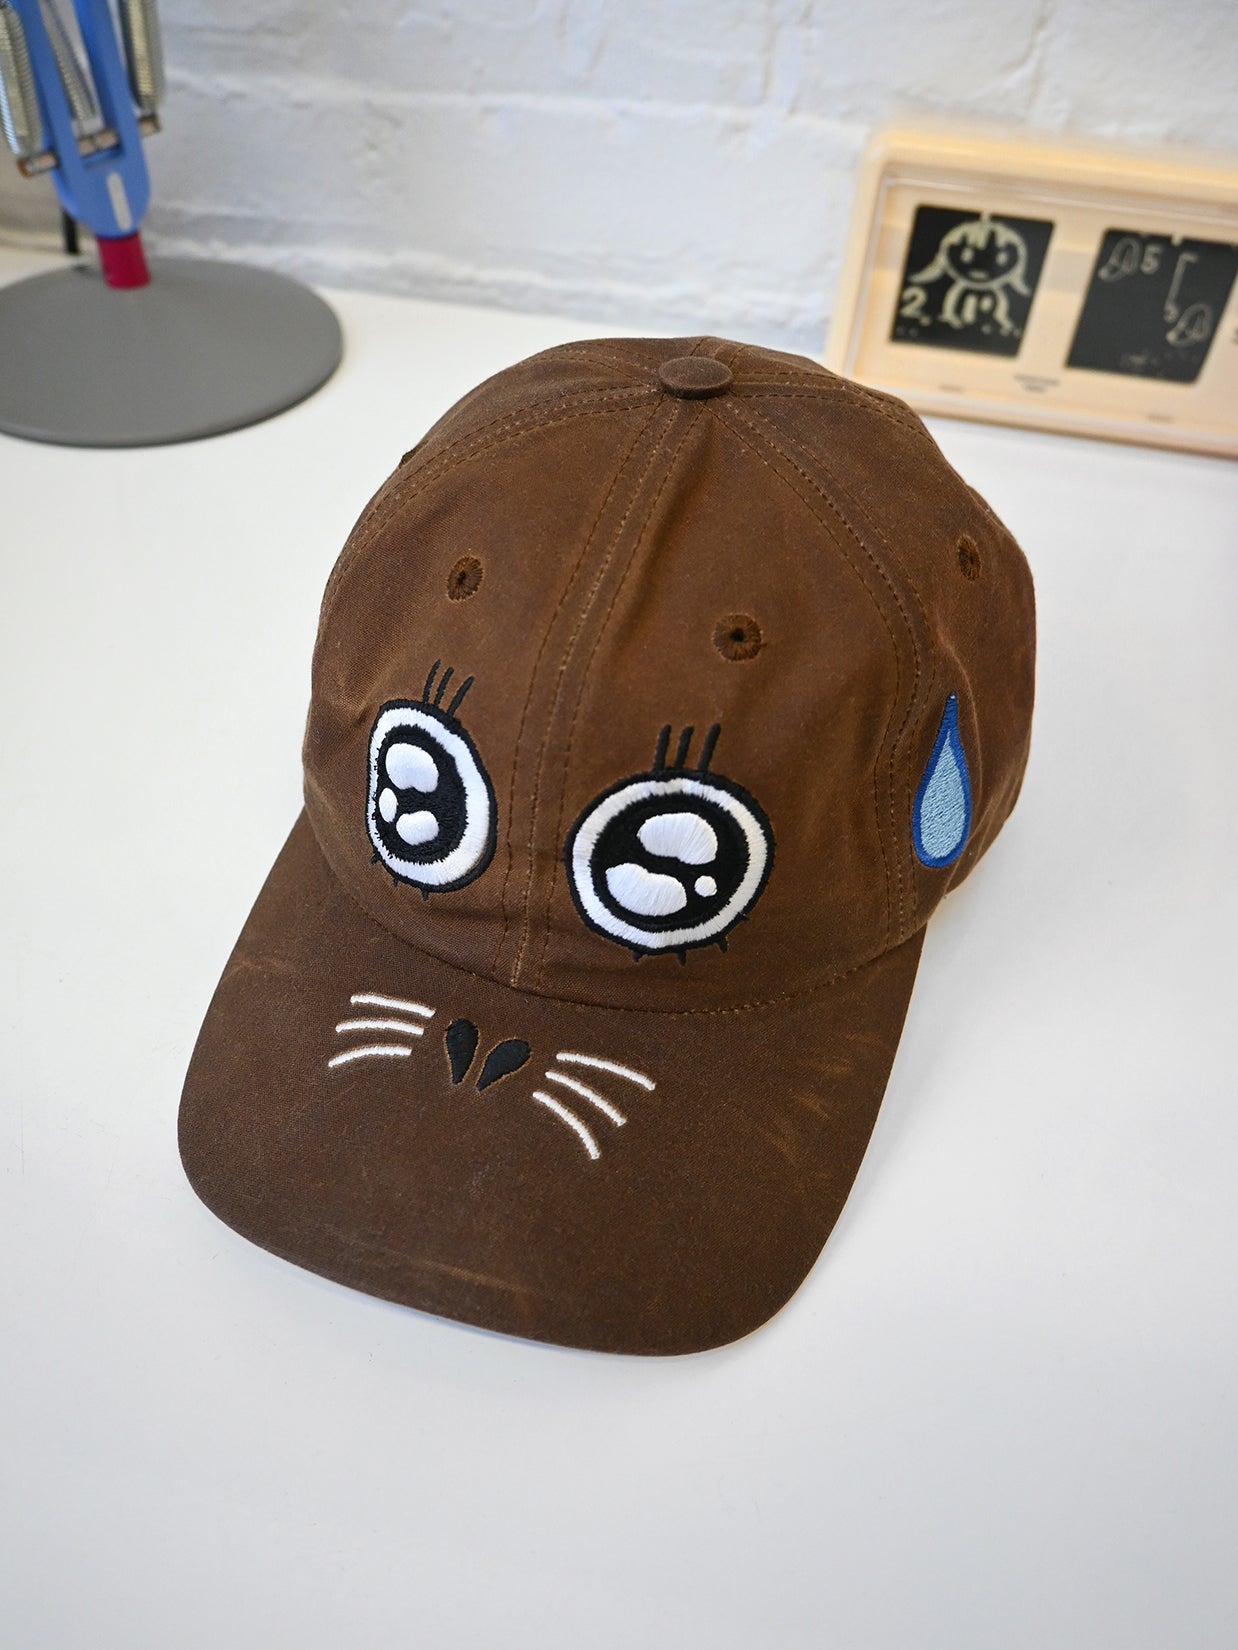 "ARGH-ARGH/SEAL" embroidered Cap design by Natali Koromoto. Made by Ho Hos Hole in The Wall. Waxed 100% cotton. Made in NYC.